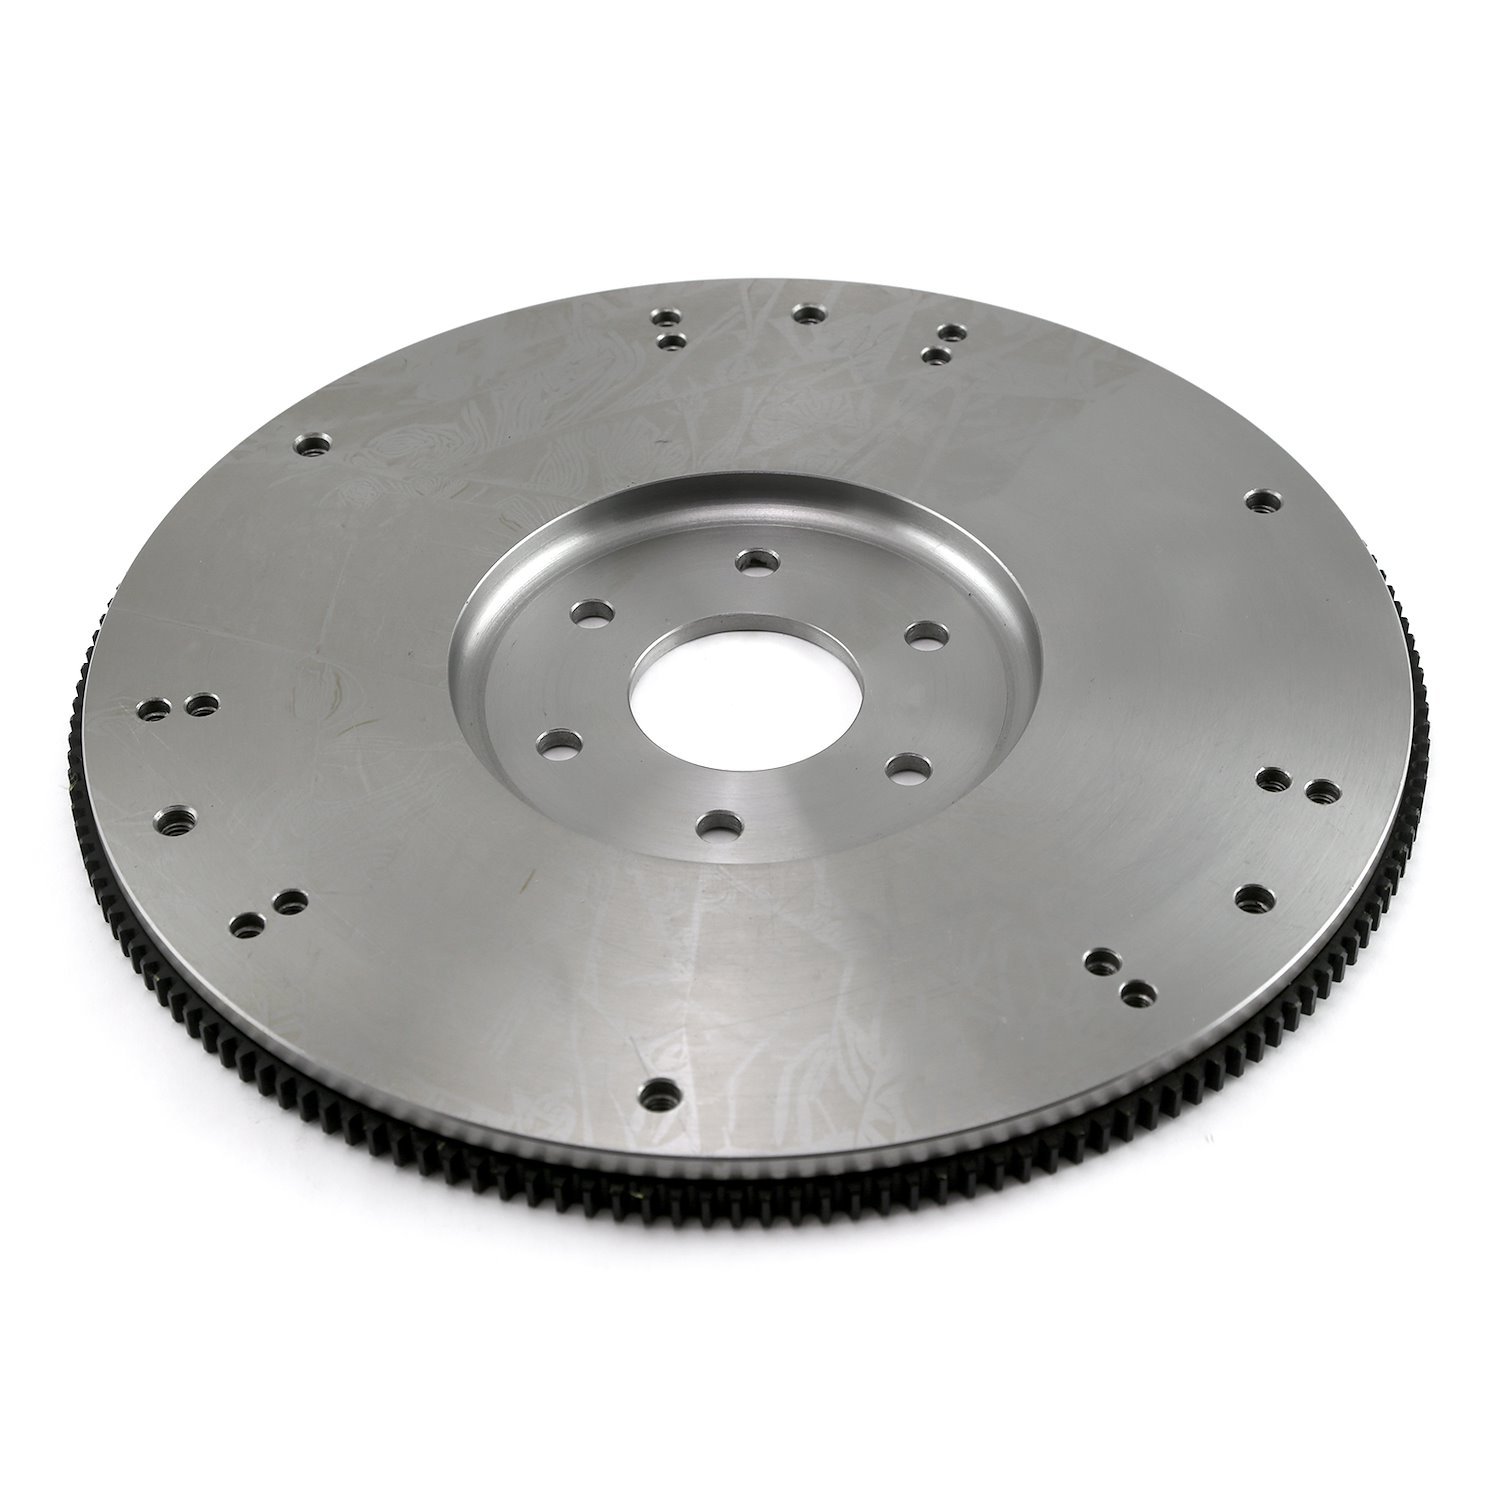 Flywheel for Ford 429, 460 [External Balance, 164-Tooth]